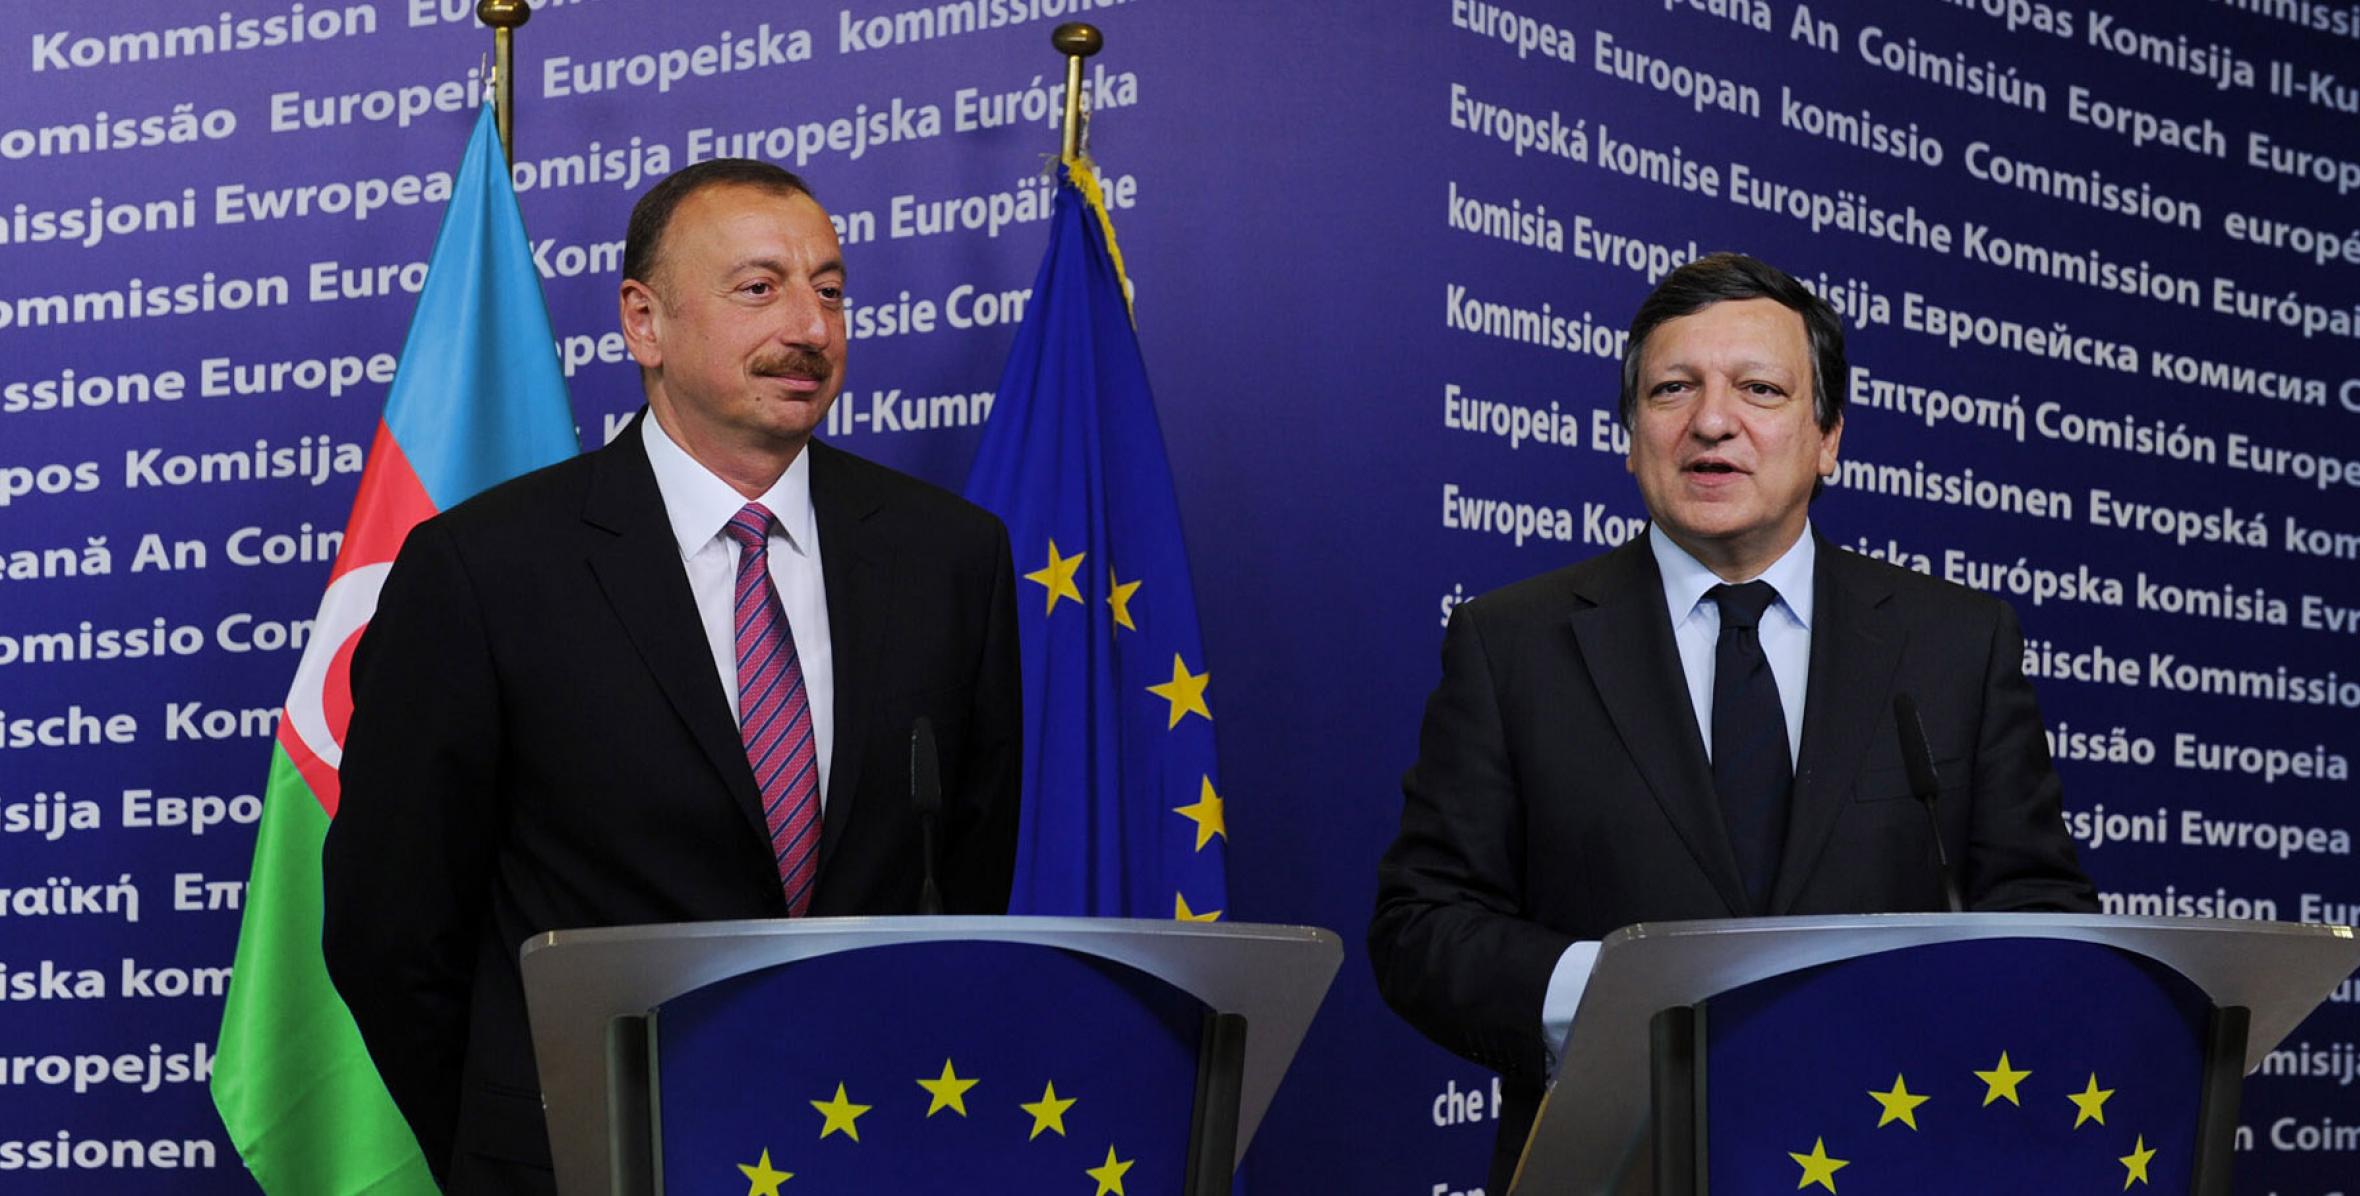 Ilham Aliyev and President of the European Commission Jose Manuel Barroso gave joint press conference